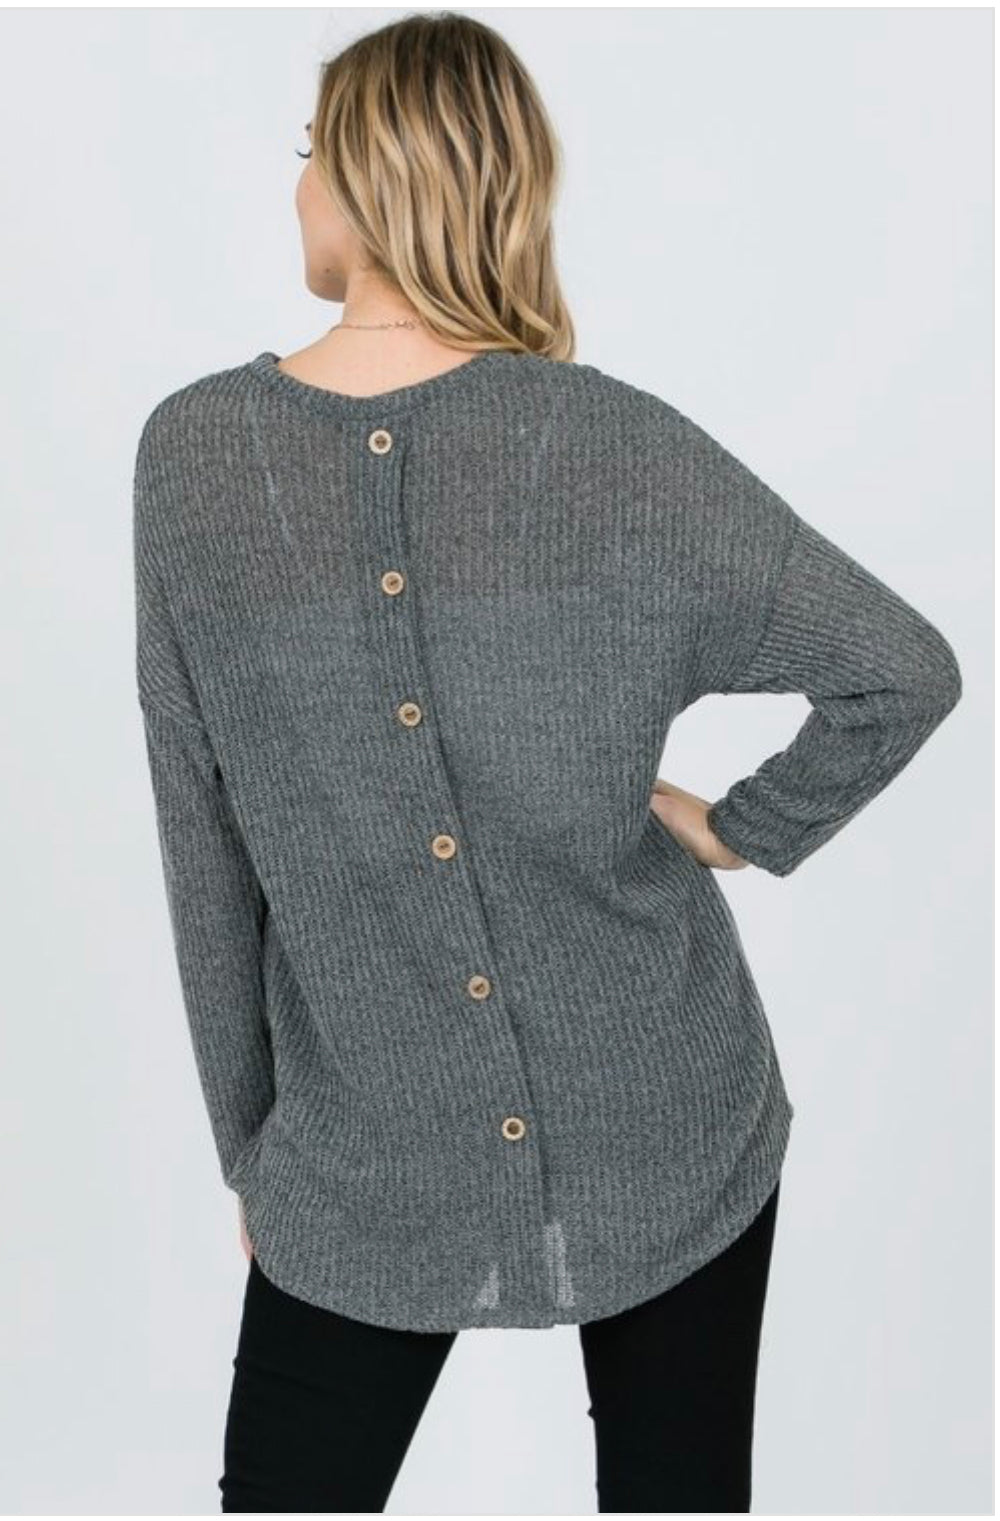 Knit Sweater Back Buttons